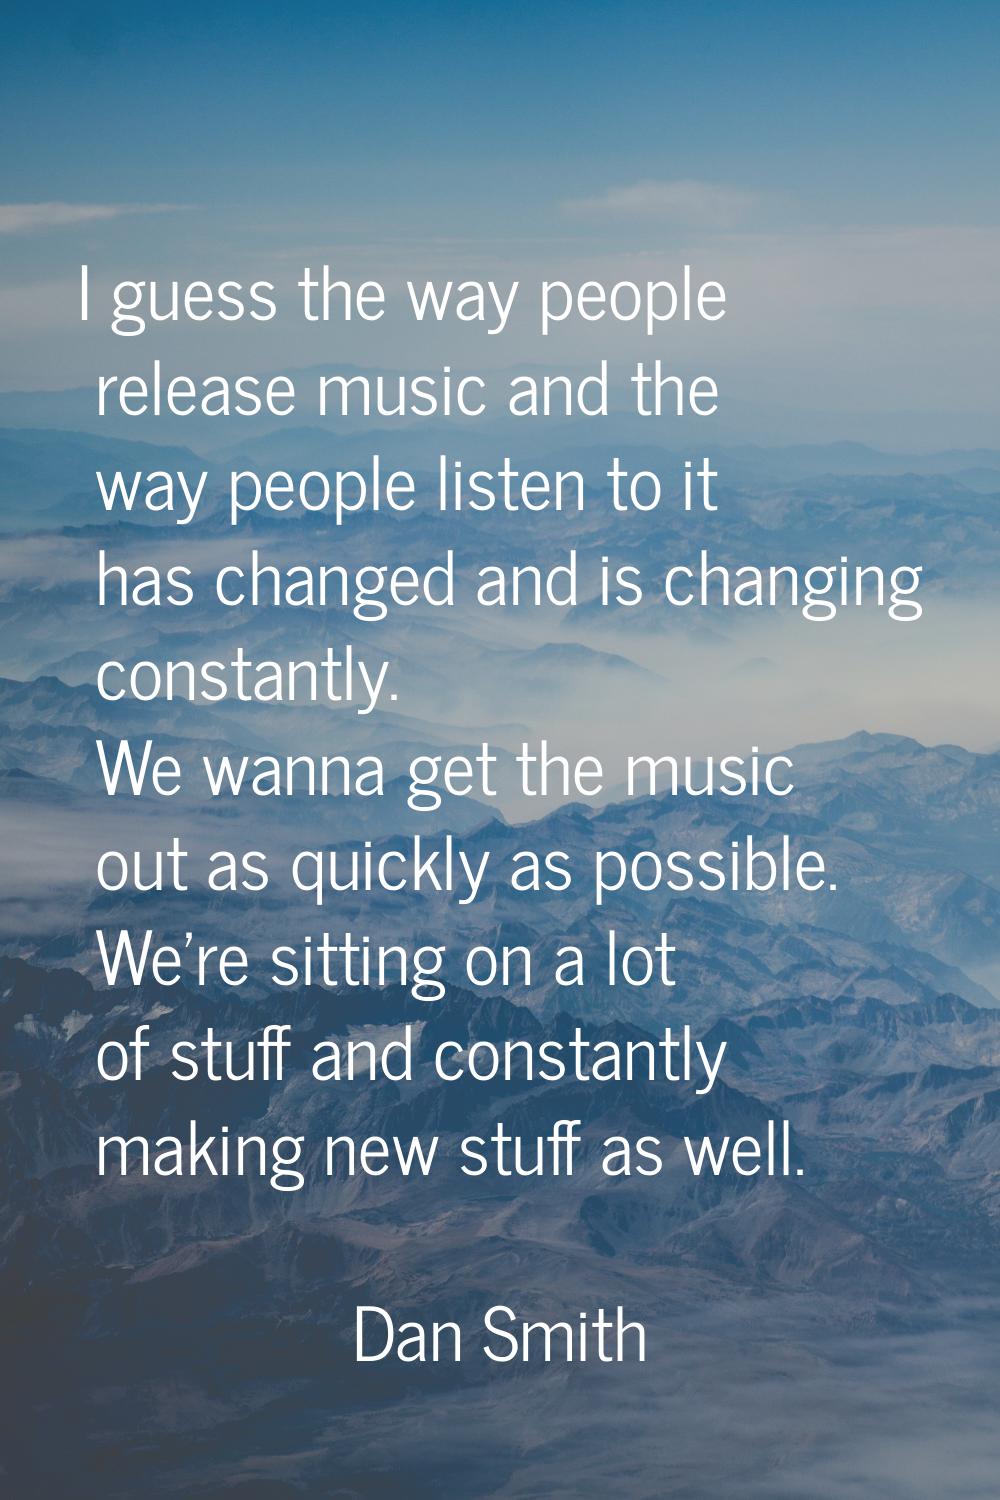 I guess the way people release music and the way people listen to it has changed and is changing co